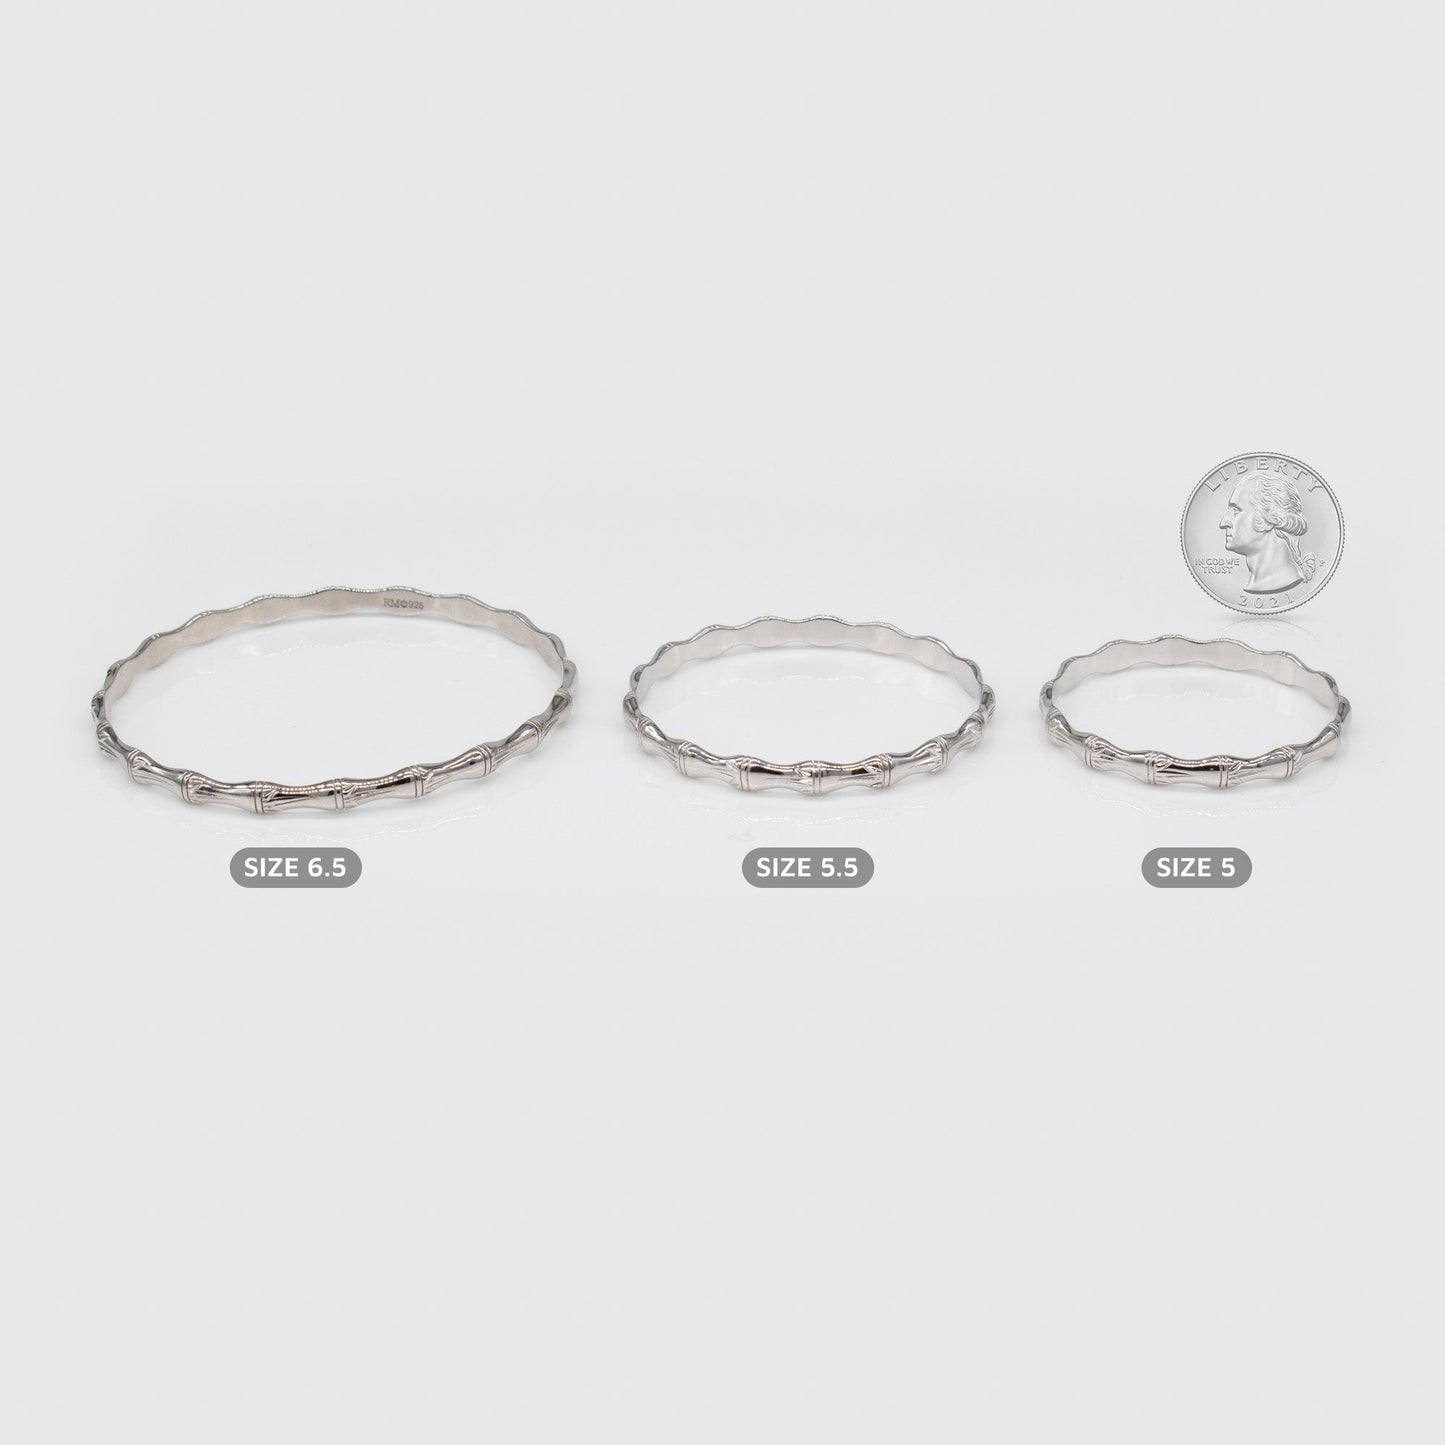 Kids Sterling Silver and Rhodium Bamboo Design Rosa Bangle. Size 5, 5.5, and 6.5.